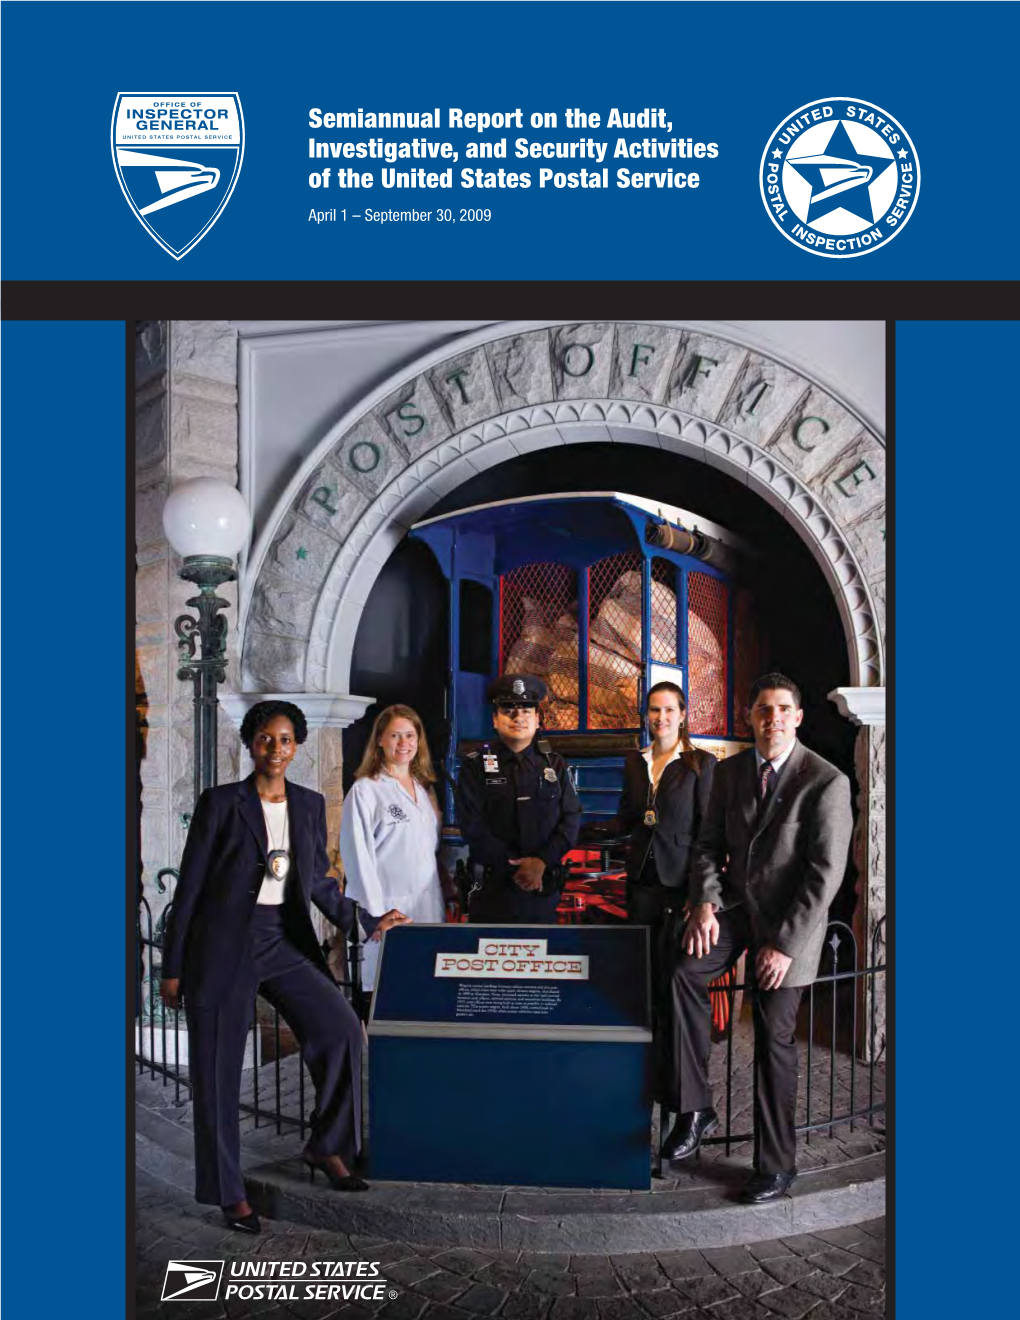 Postal Inspection Service Provide Statistics and Activities for the 6-Month Period of April 1 Through September 30, 2009